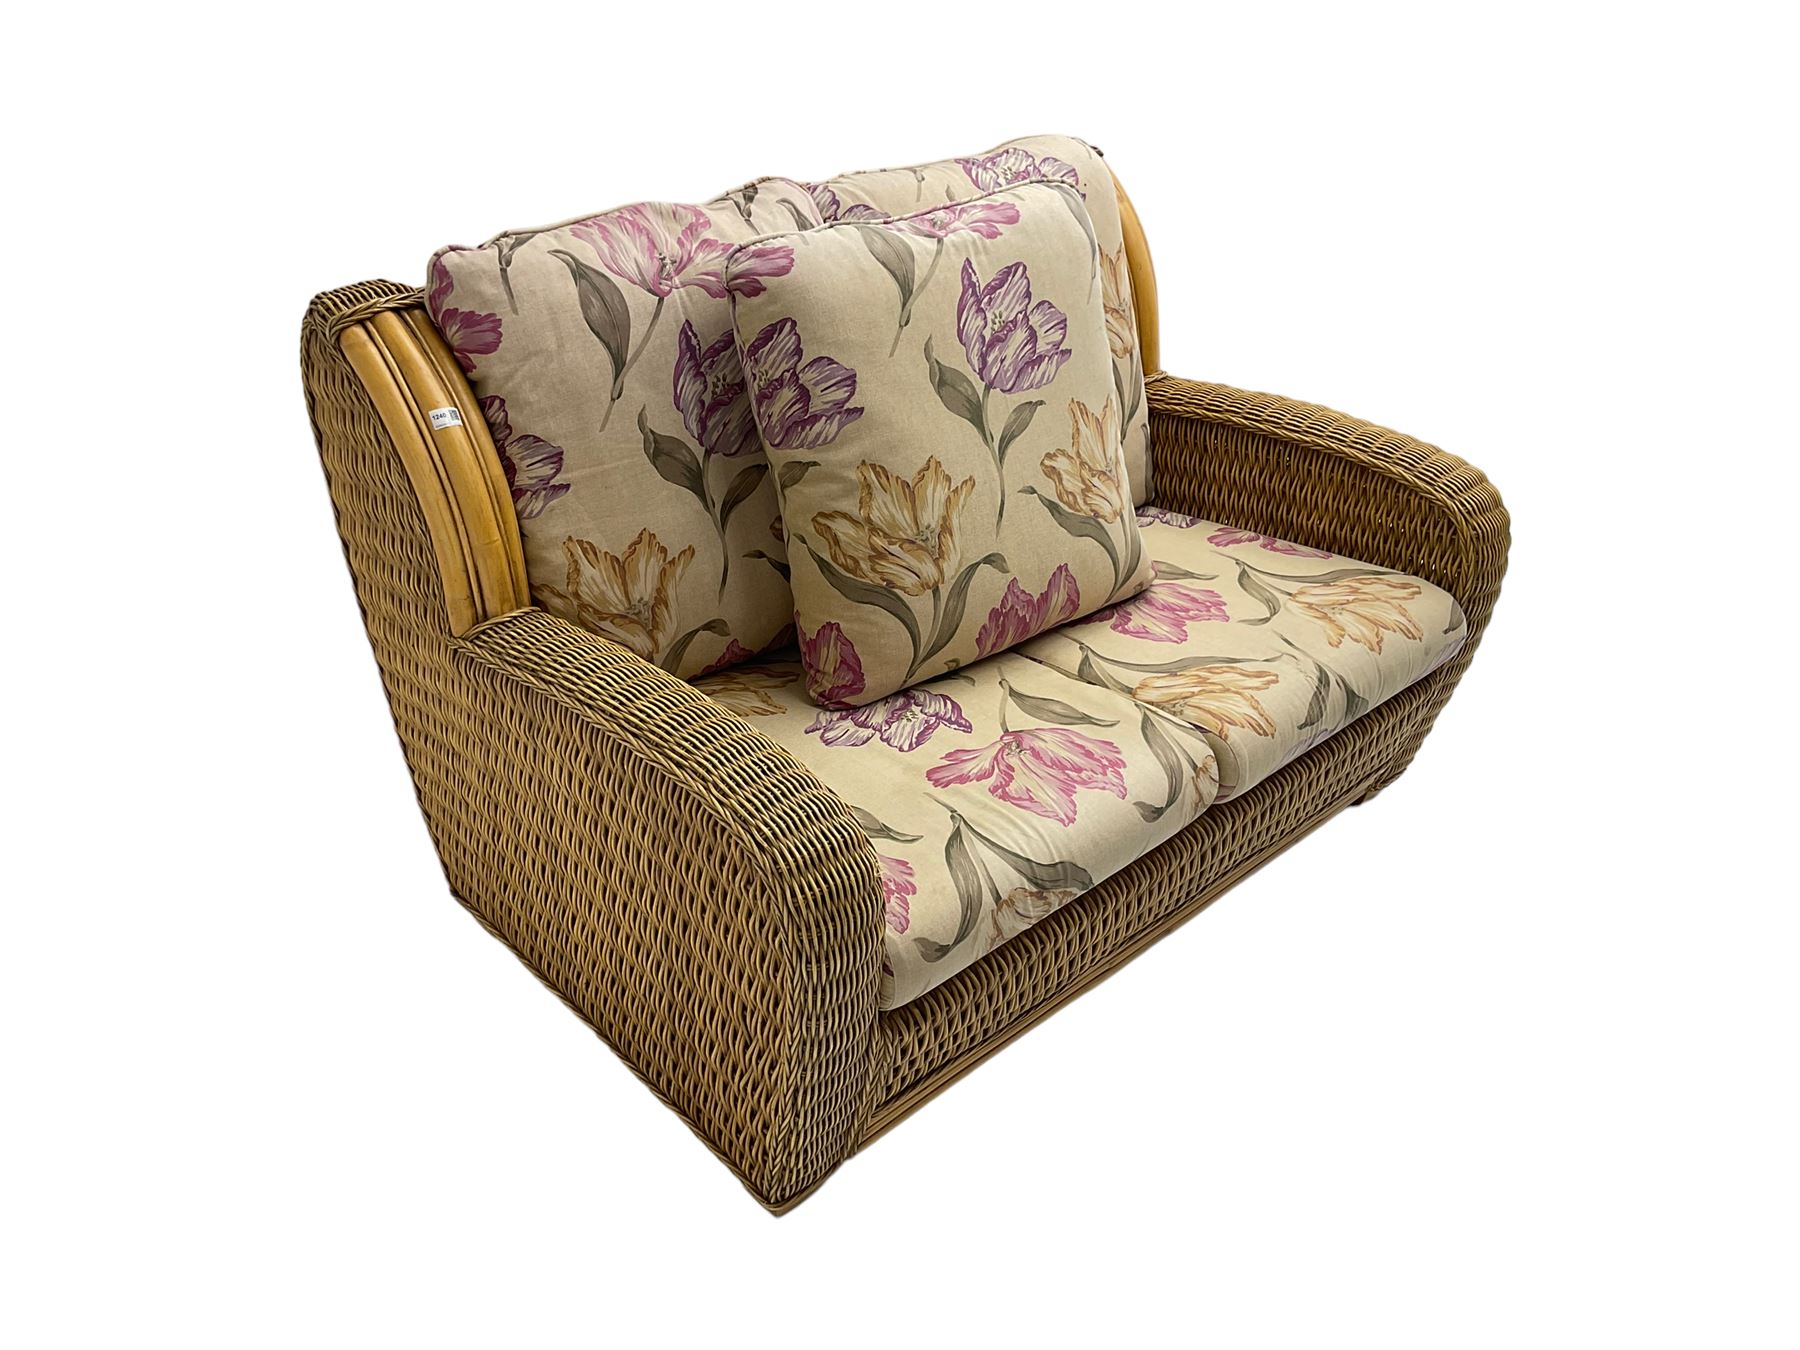 Two seat bamboo and wicker conservatory sofa - Image 7 of 7